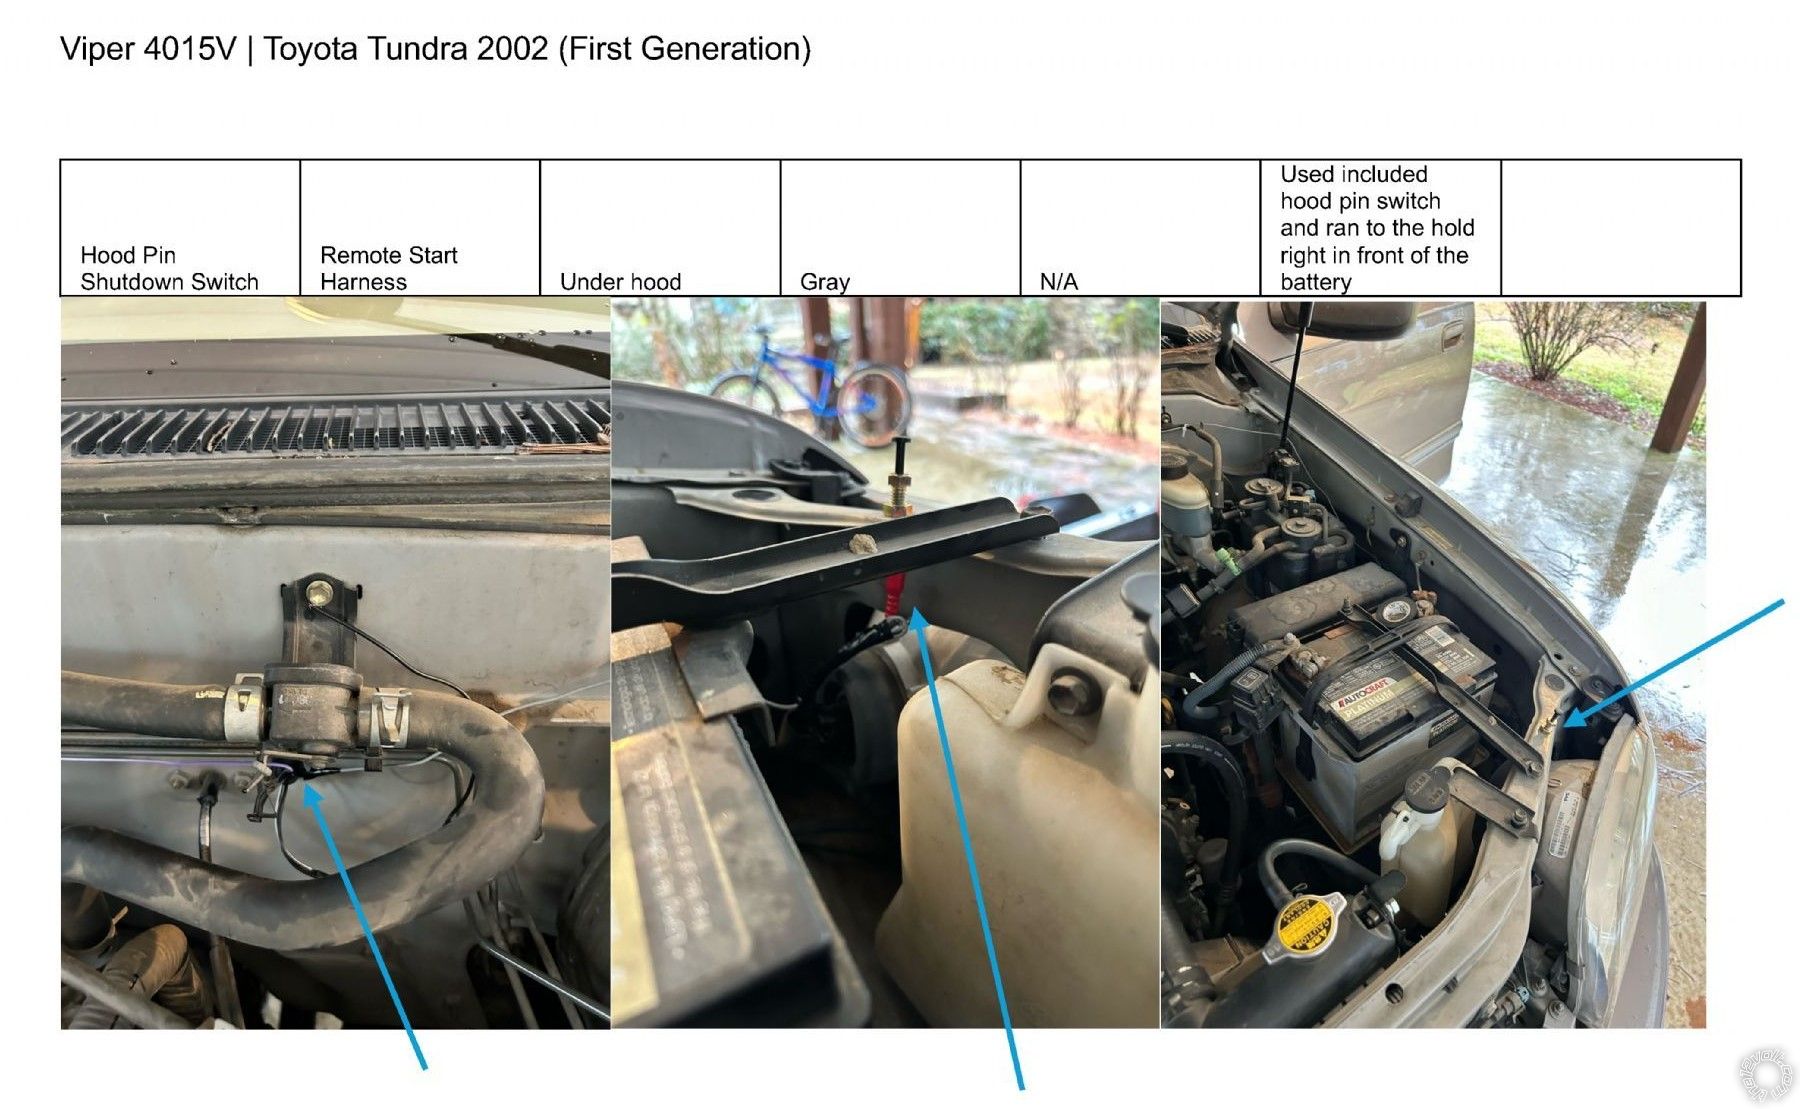 2002 Toyota Tundra, Viper 4105v Remote Start, Pictorial -- posted image.